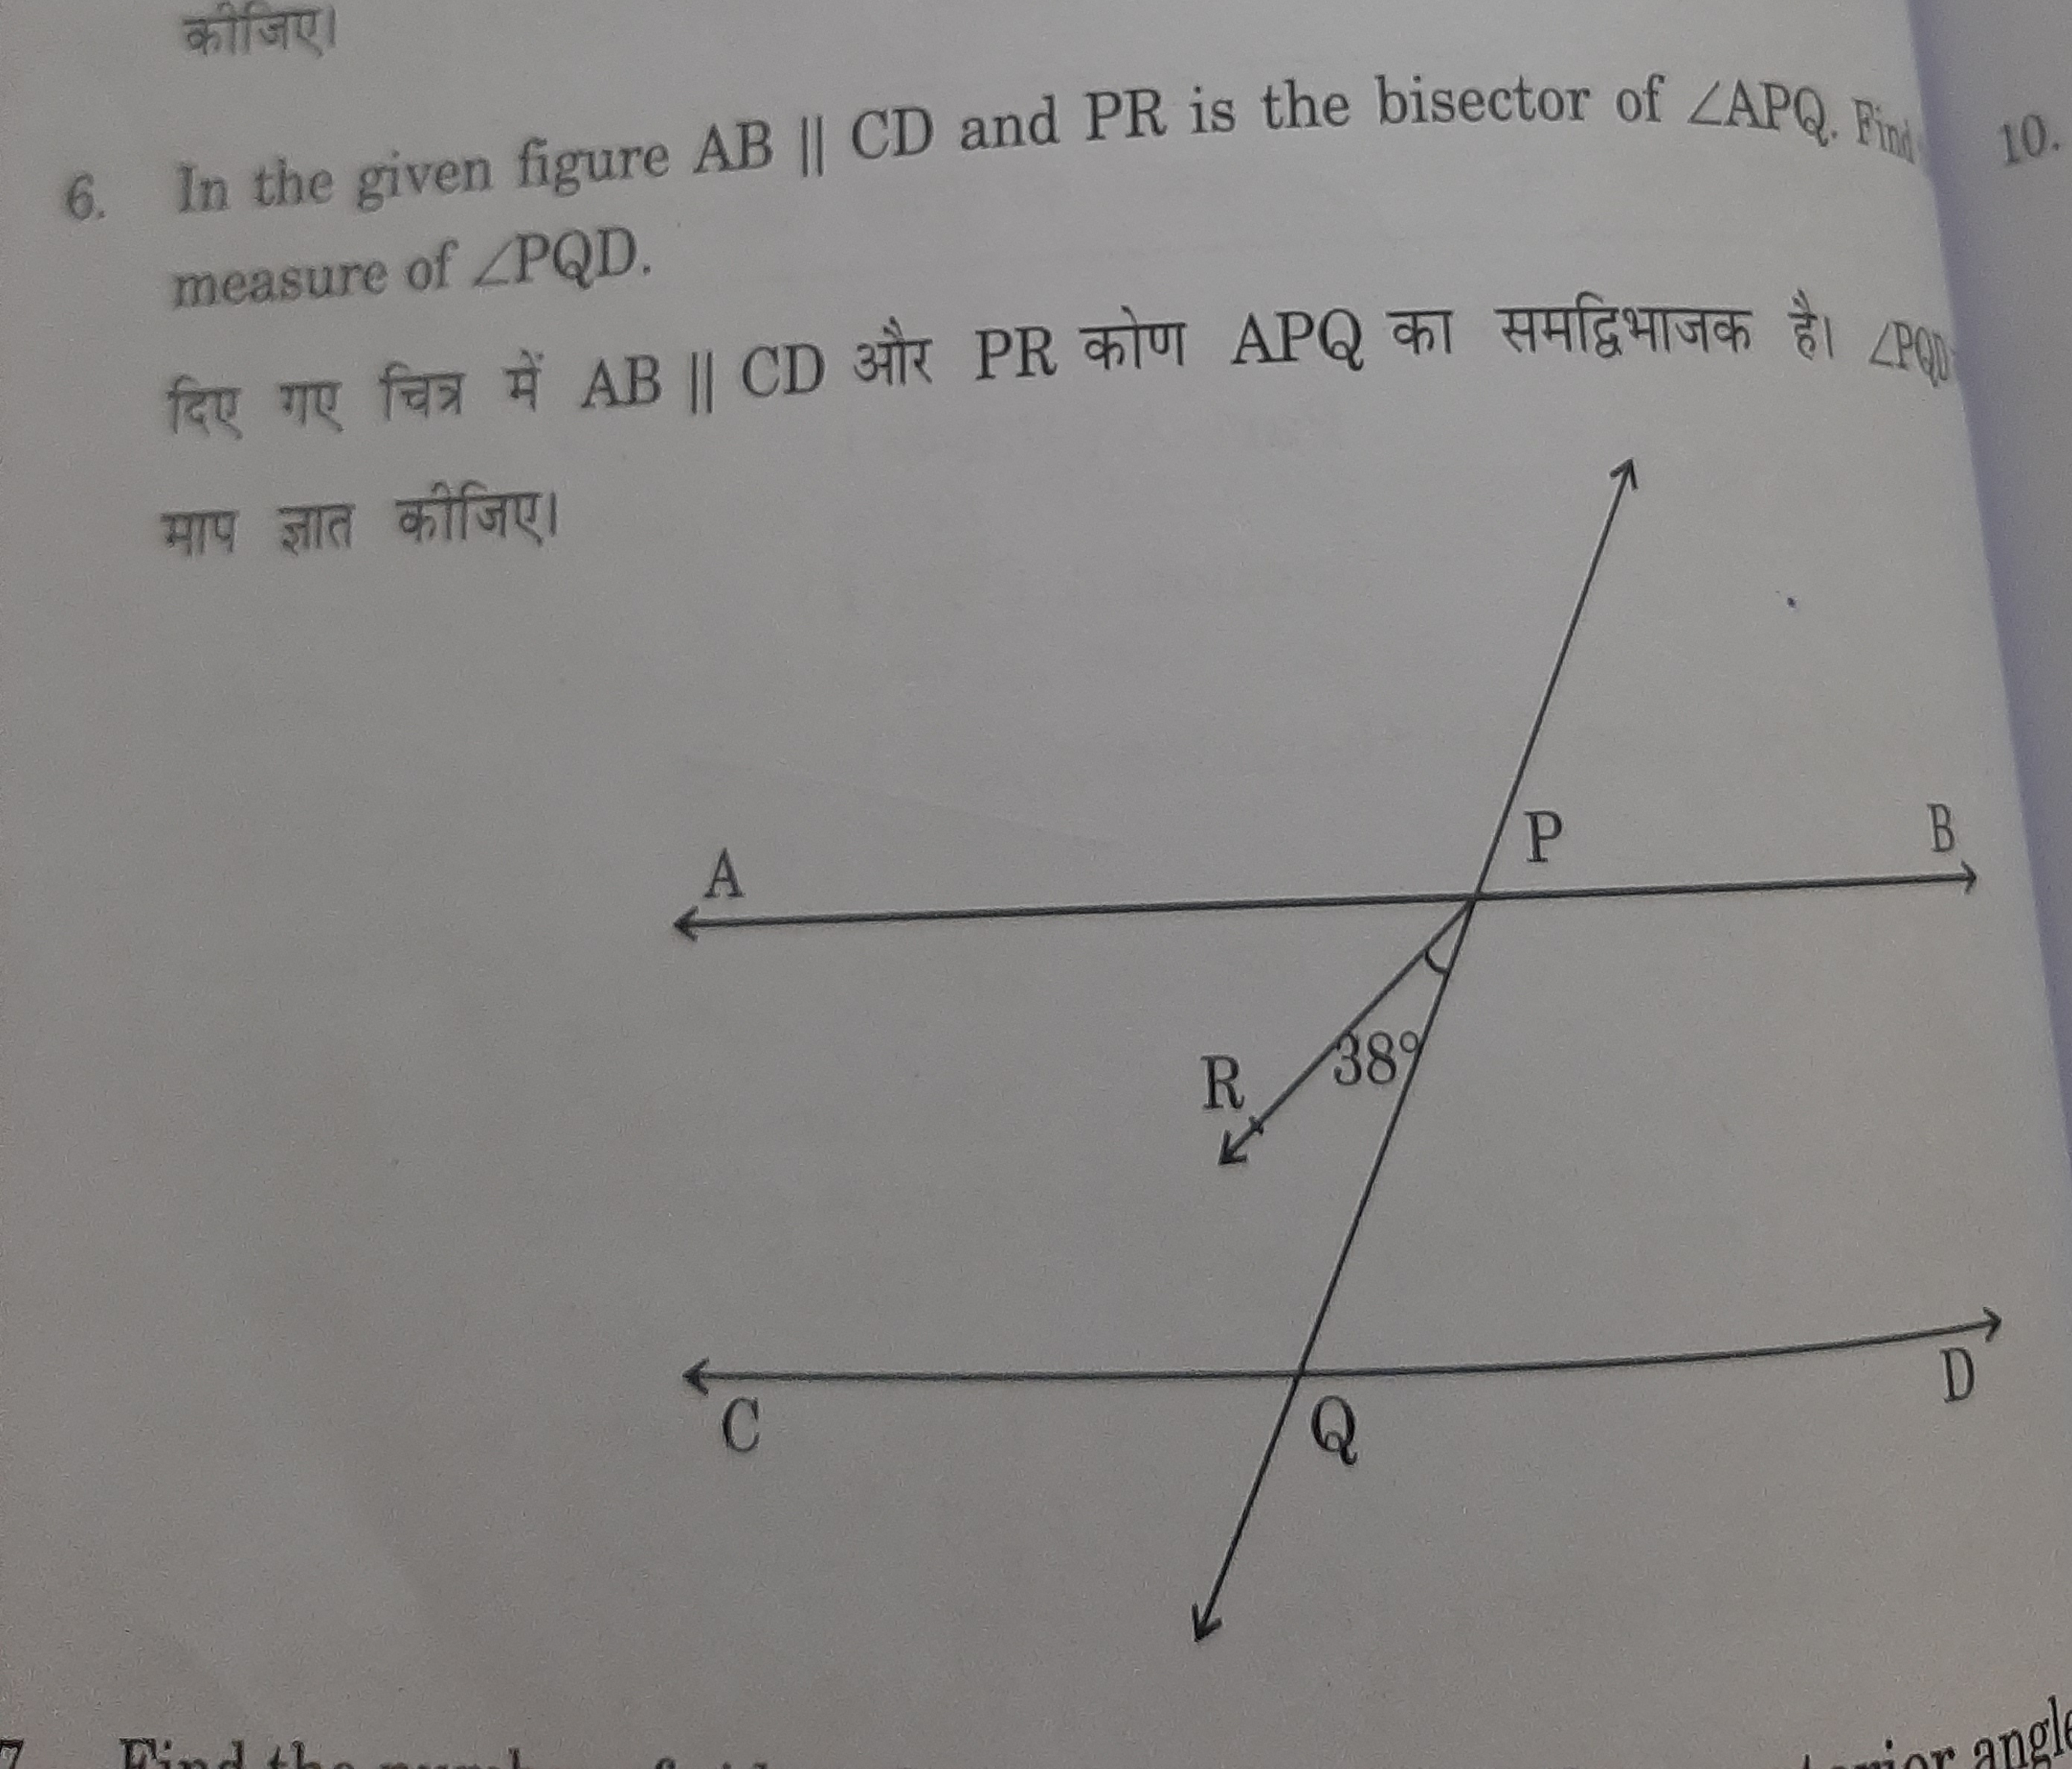 कीजिए।
6. In the given figure AB∥CD and PR is the bisector of ∠APQ. Fi